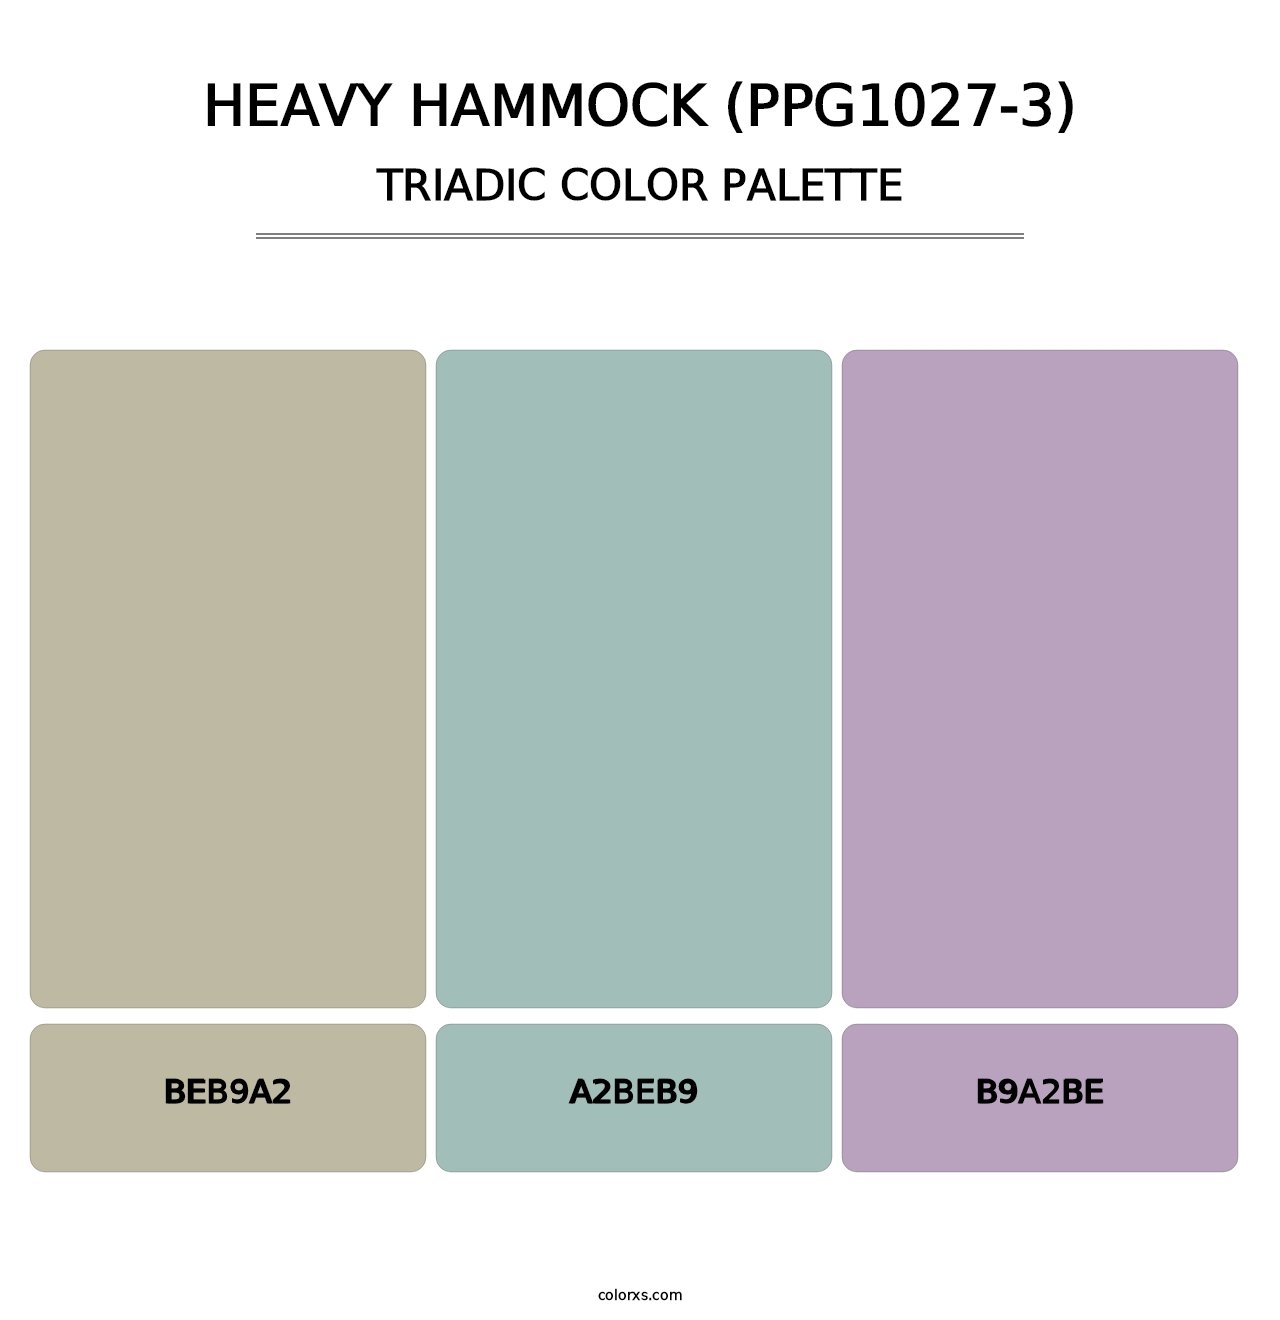 Heavy Hammock (PPG1027-3) - Triadic Color Palette